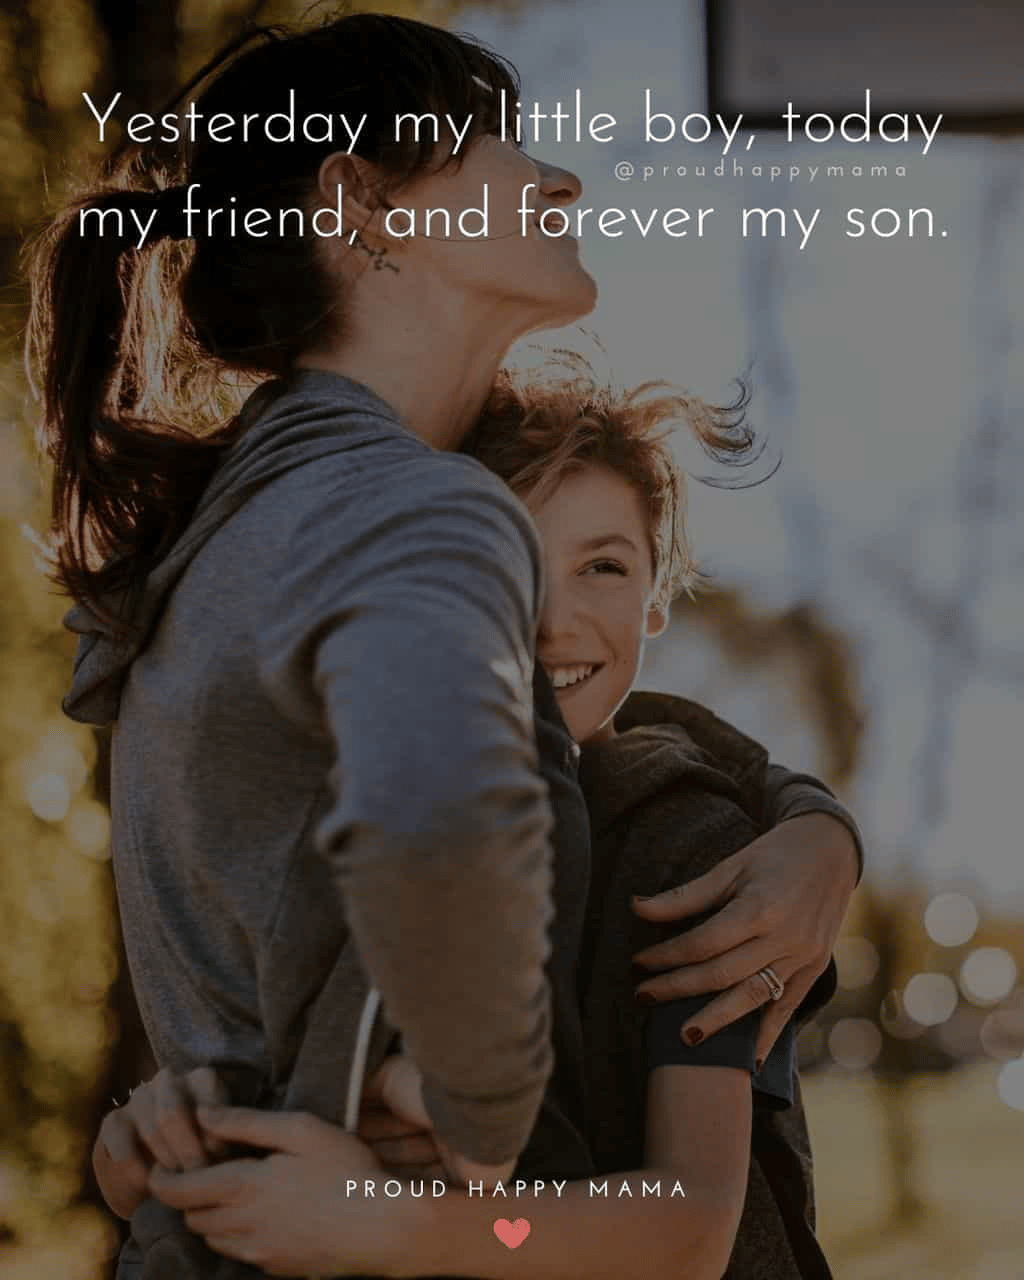 “Yesterday my little boy, today my friend, and forever my son.” - Proud Happy Mama